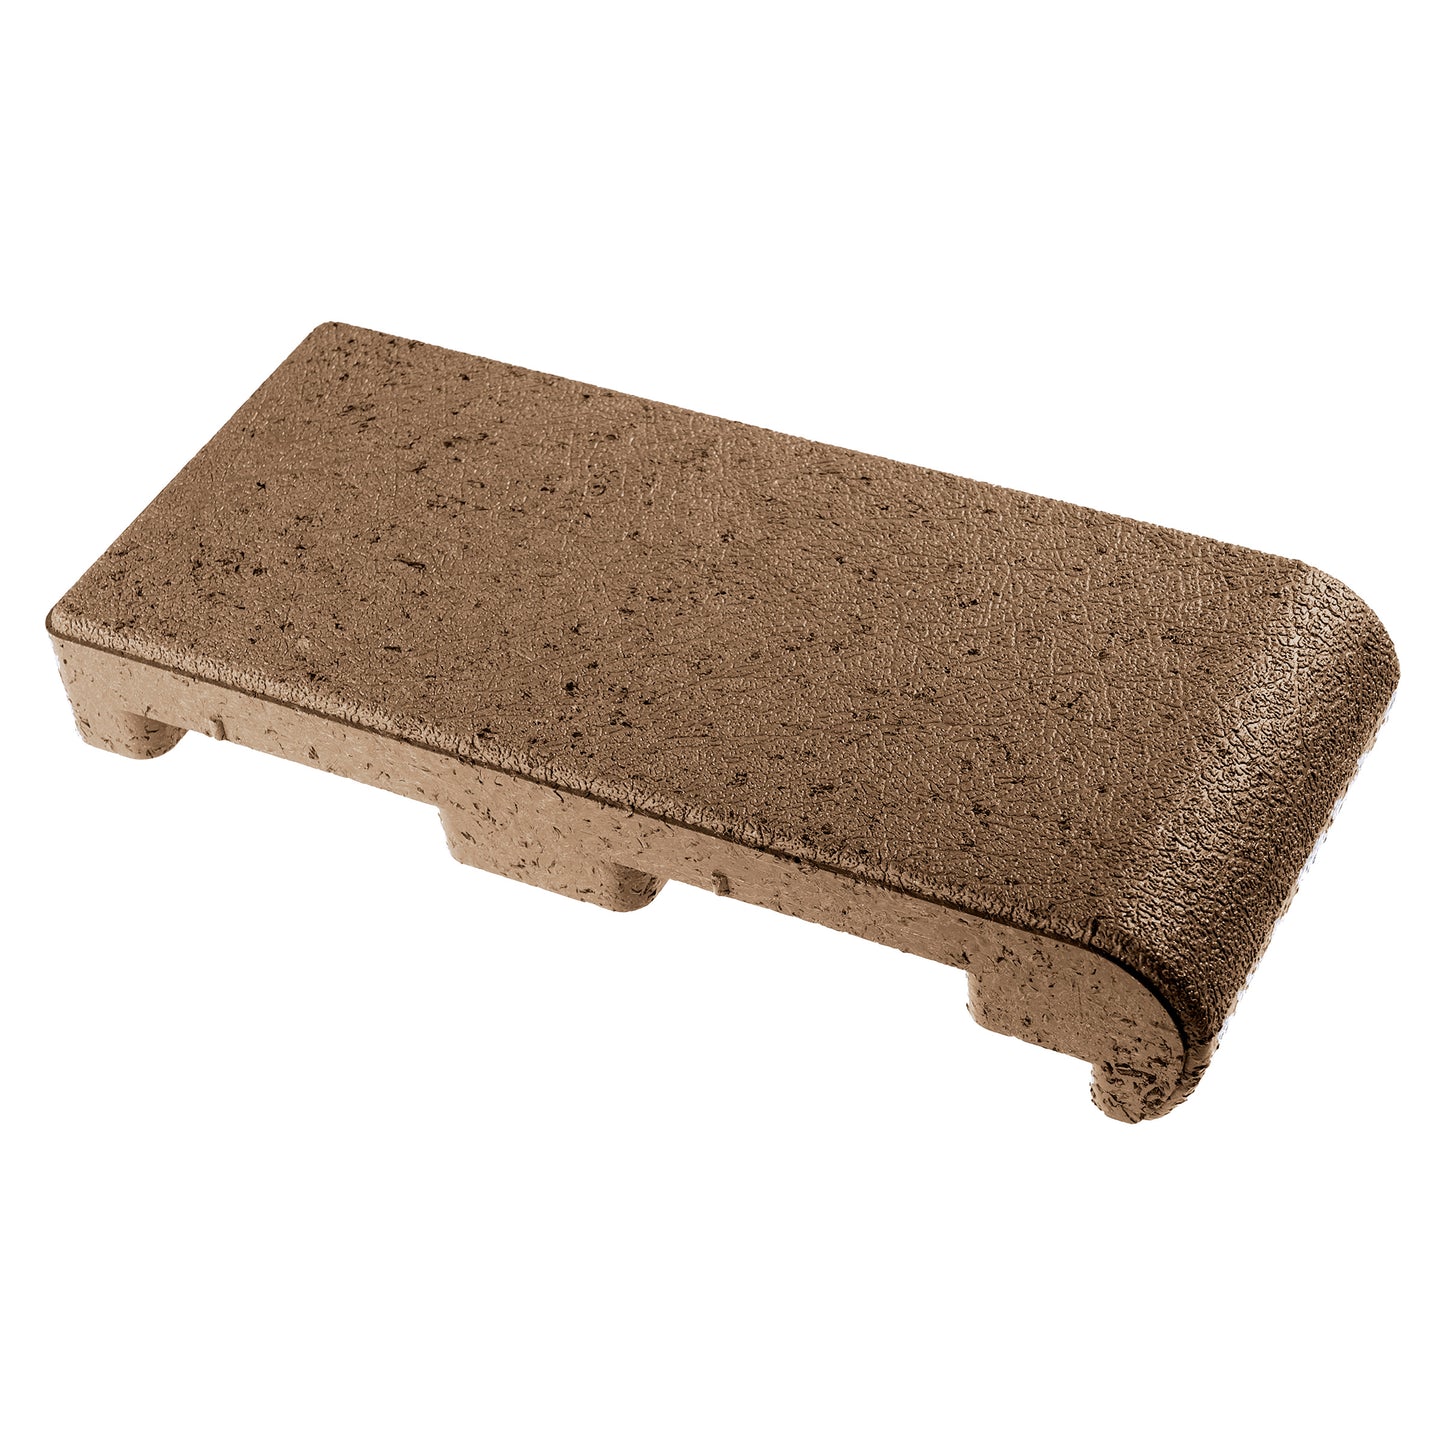 Aspire Bullnose with Legs (4" x 9" box of 36) - 12 linear feet